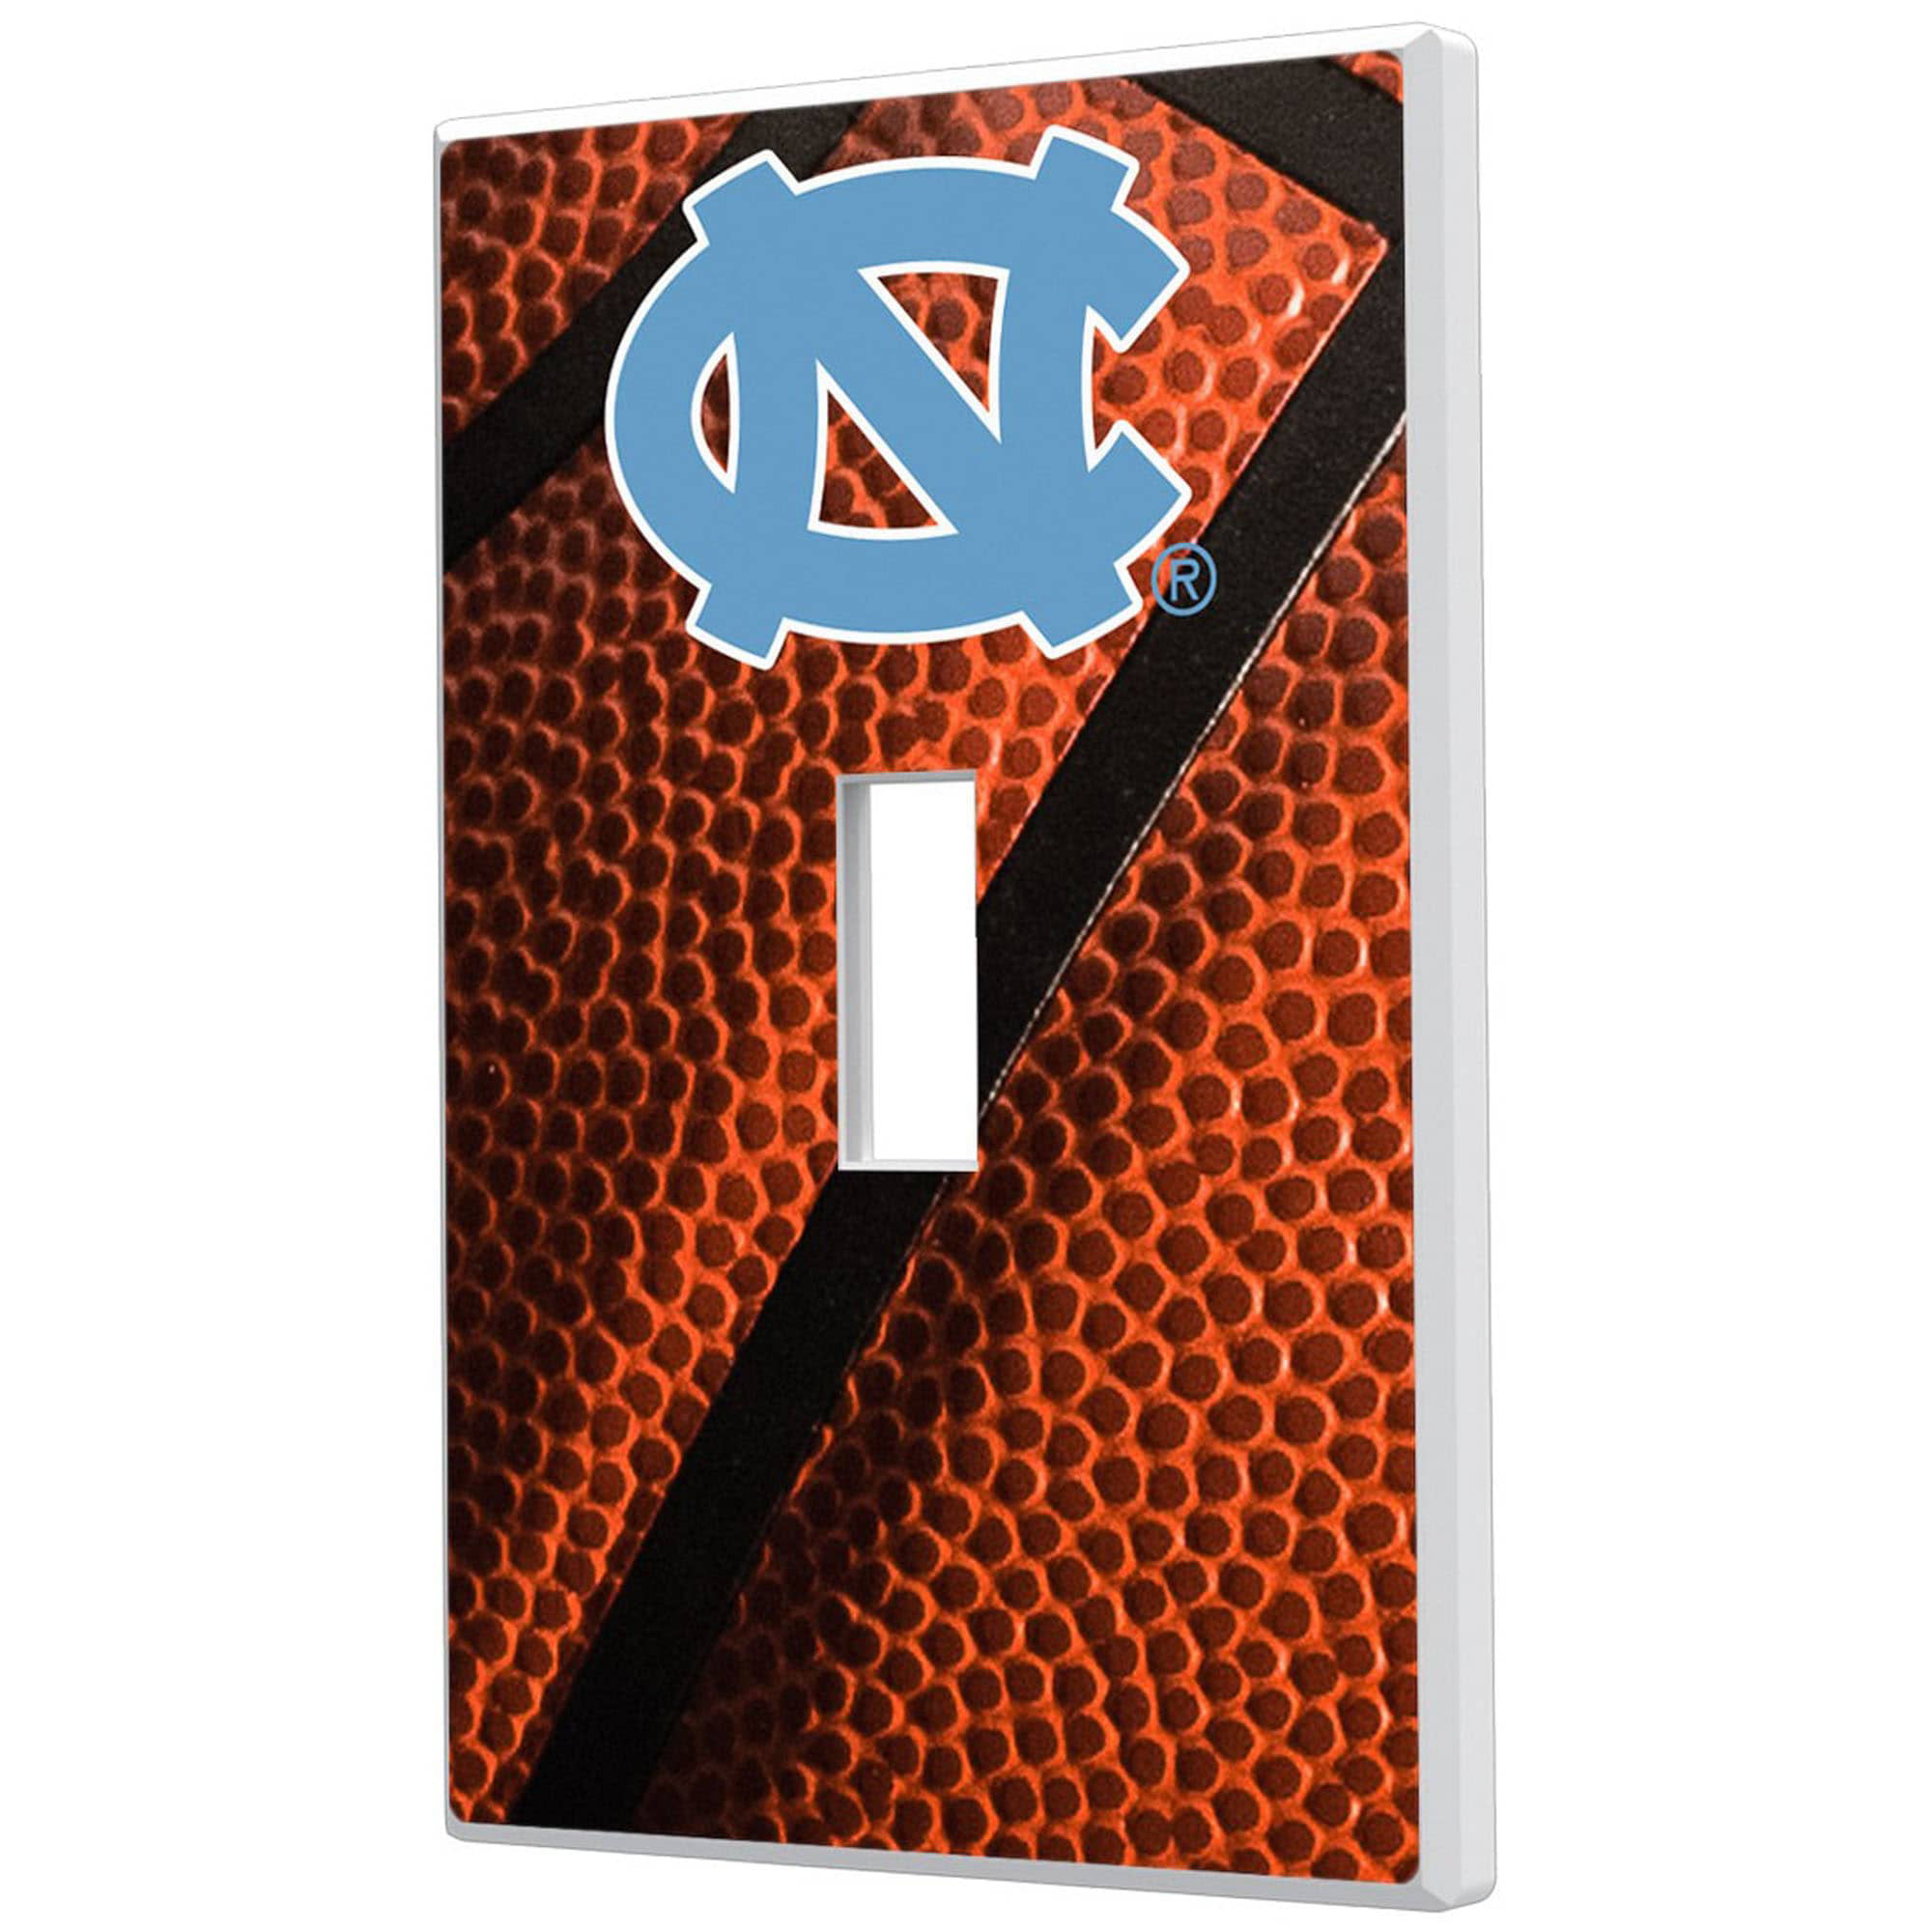 UNC Tarheels Light Switch Covers Basketball NCAA Home Decor Outlet 